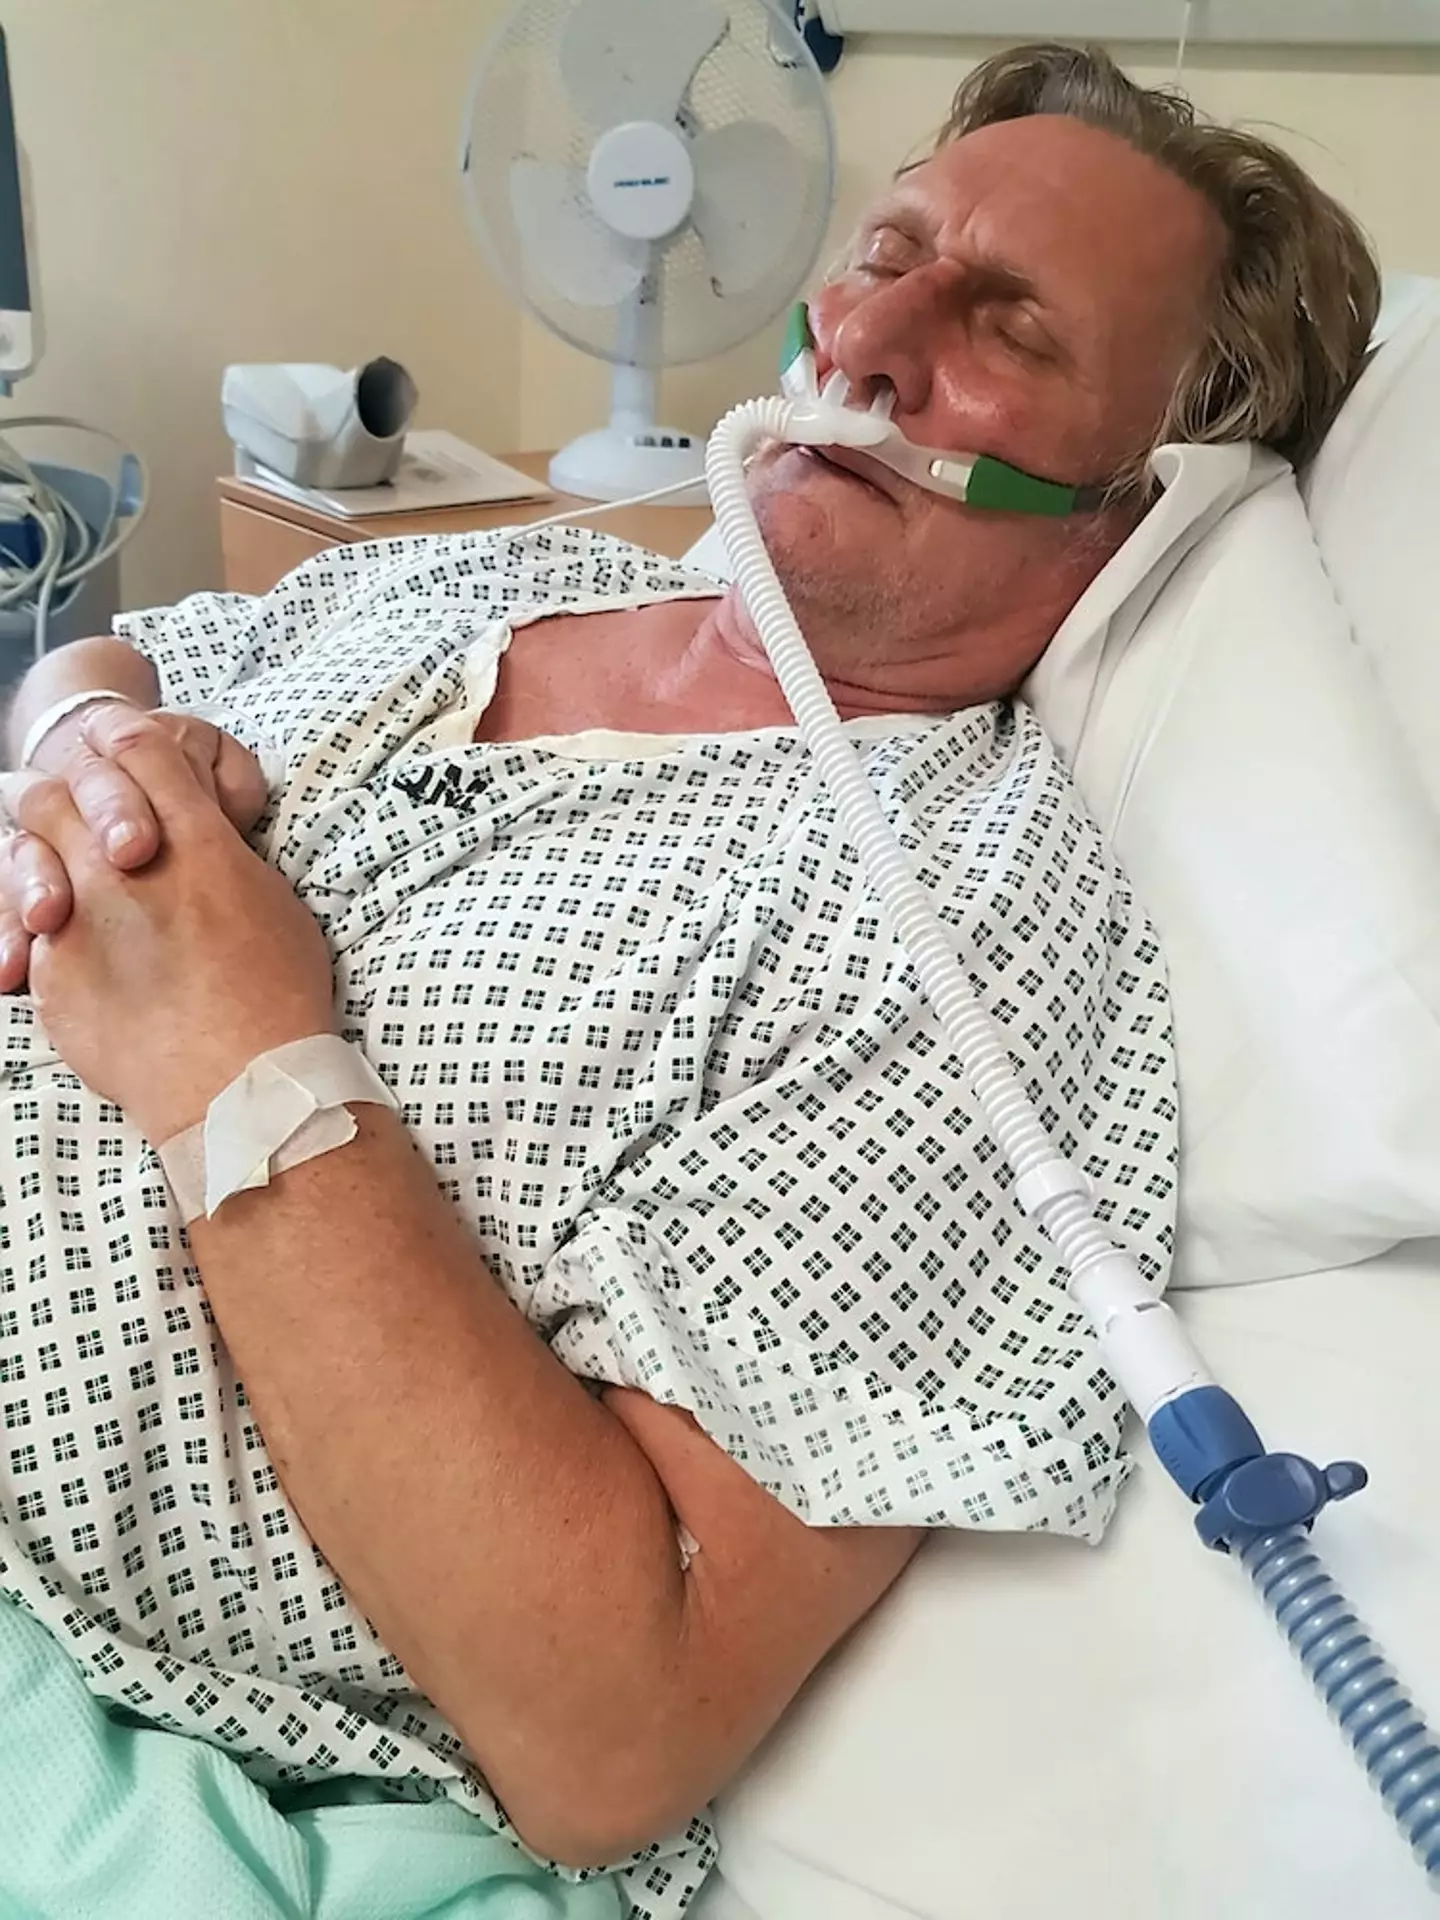 Gary McClellan was left in intensive care after contracting Legionnaires' disease.